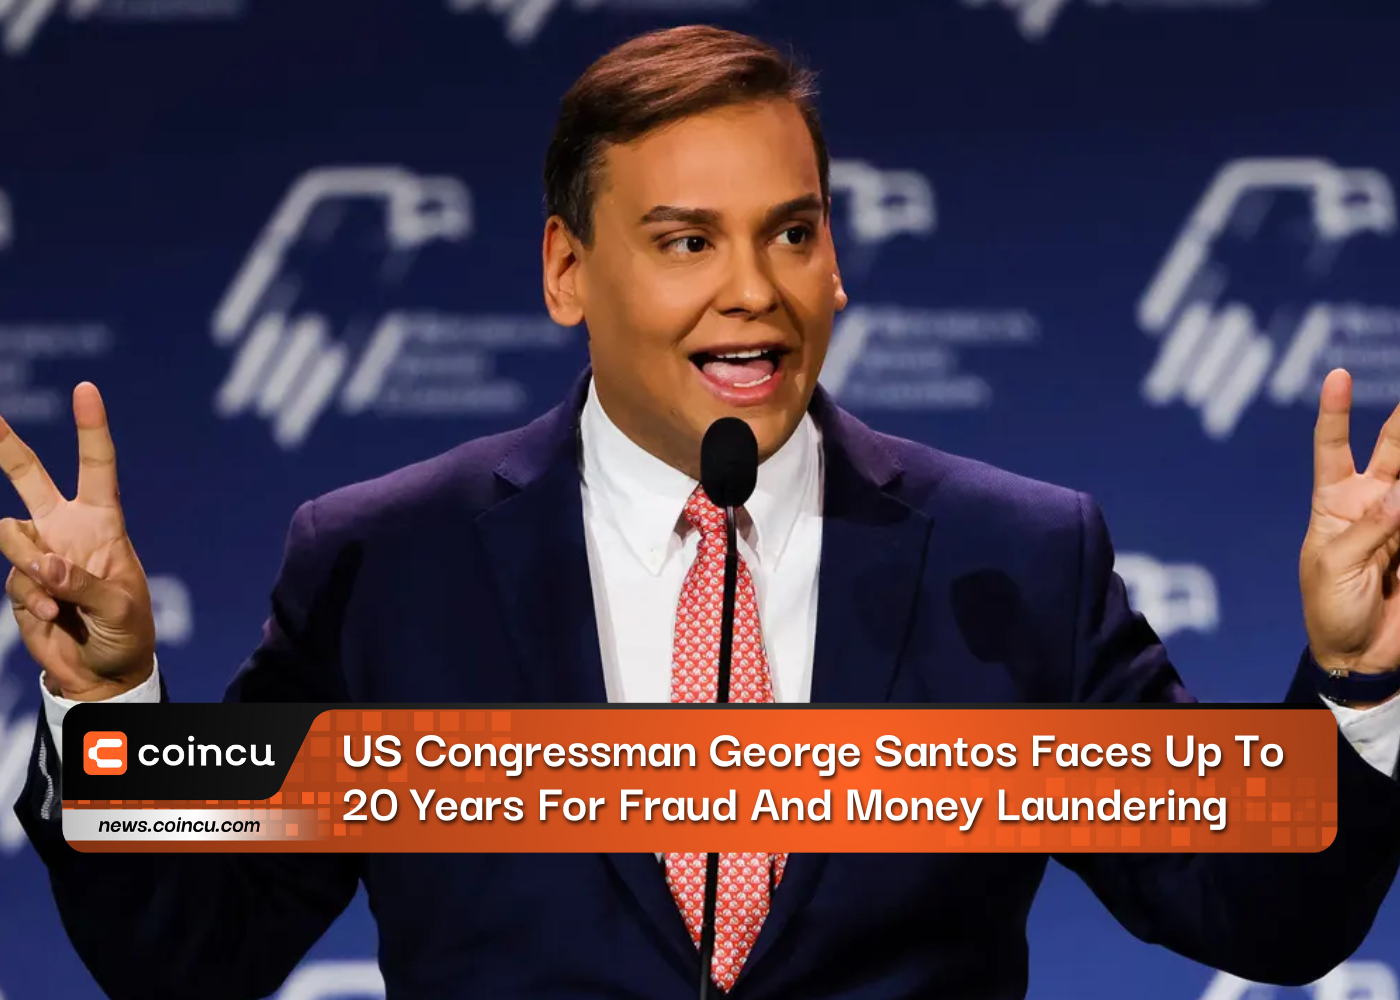 US Congressman George Santos Faces Up To 20 Years For Fraud And Money Laundering